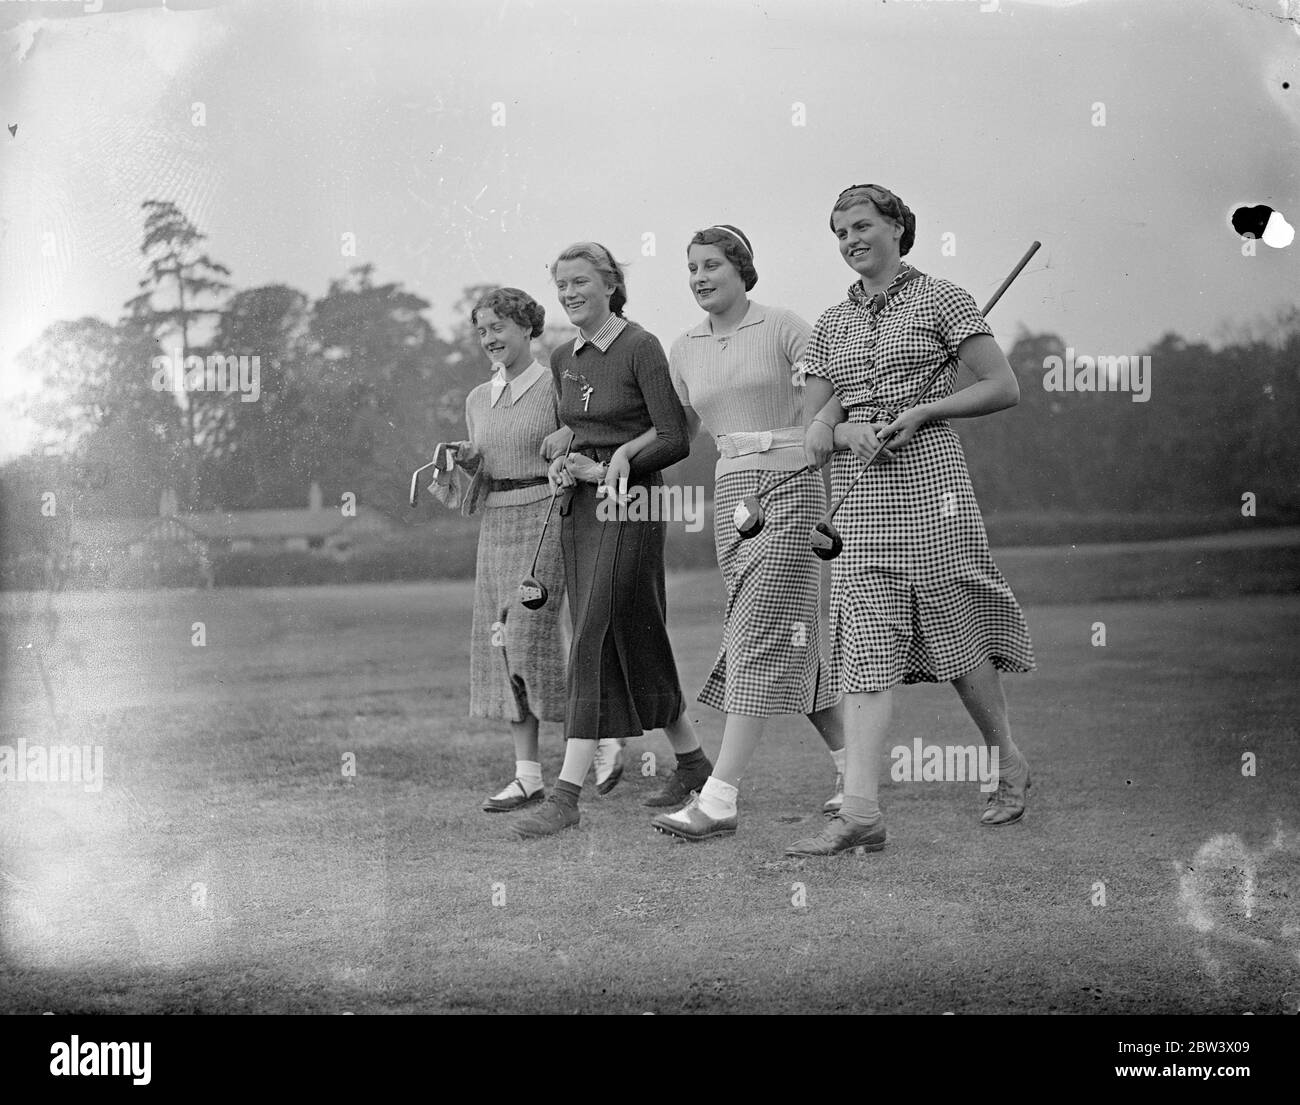 The open golf championship at Stoke Poges . The opening matches in the Girls Open Golf Championship were played at Stoke Poges . Britian ' s leading girl players are being challenged by two French competitors , Lally and Sonia Vagliano , and one South African , Miss Daphne Martyn from Port Elizabeth . Photo shows , left to right , Miss Peggy Edwards , Miss Angela Noble , Miss Pam Shand and Miss Joan Hives . 9 September 1936 Original caption from negative Stock Photo